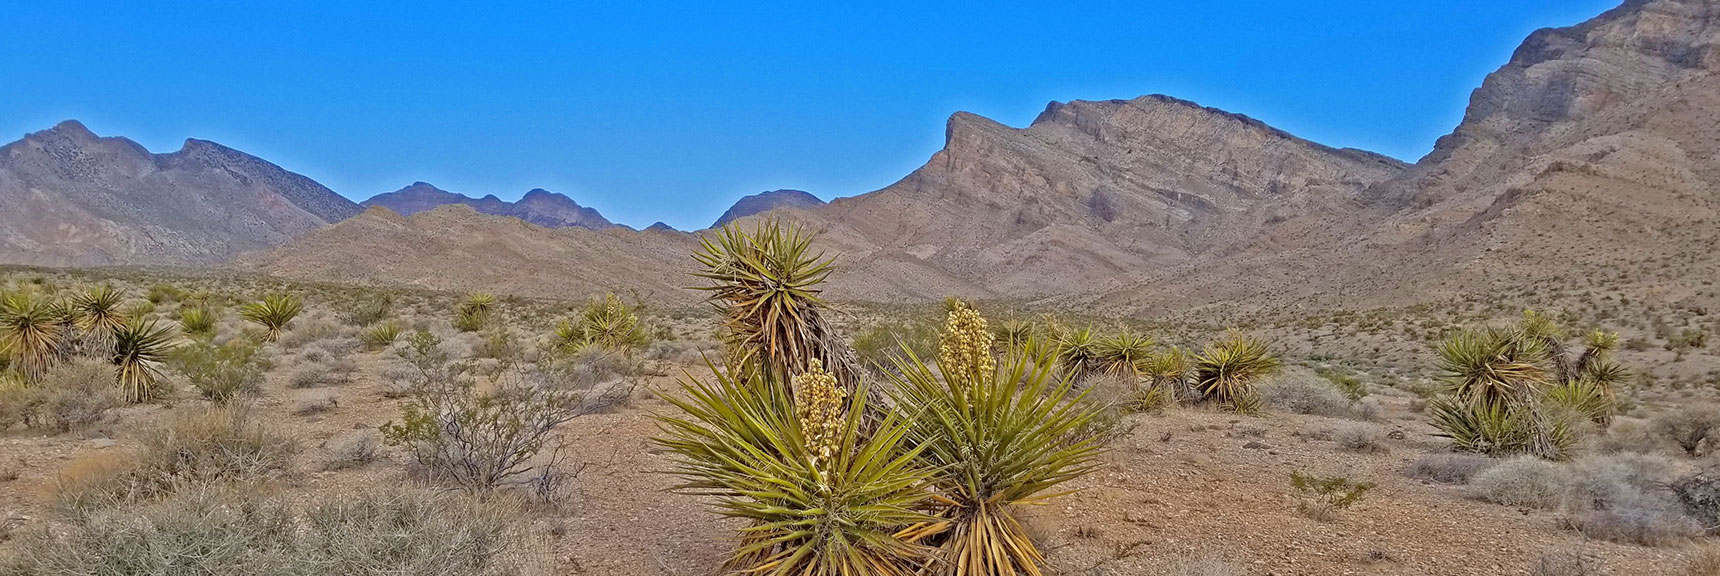 Yucca Plants in Bloom This 2nd Saturday in April | Little Red Rock Las Vegas, Nevada, Near La Madre Mountains Wilderness